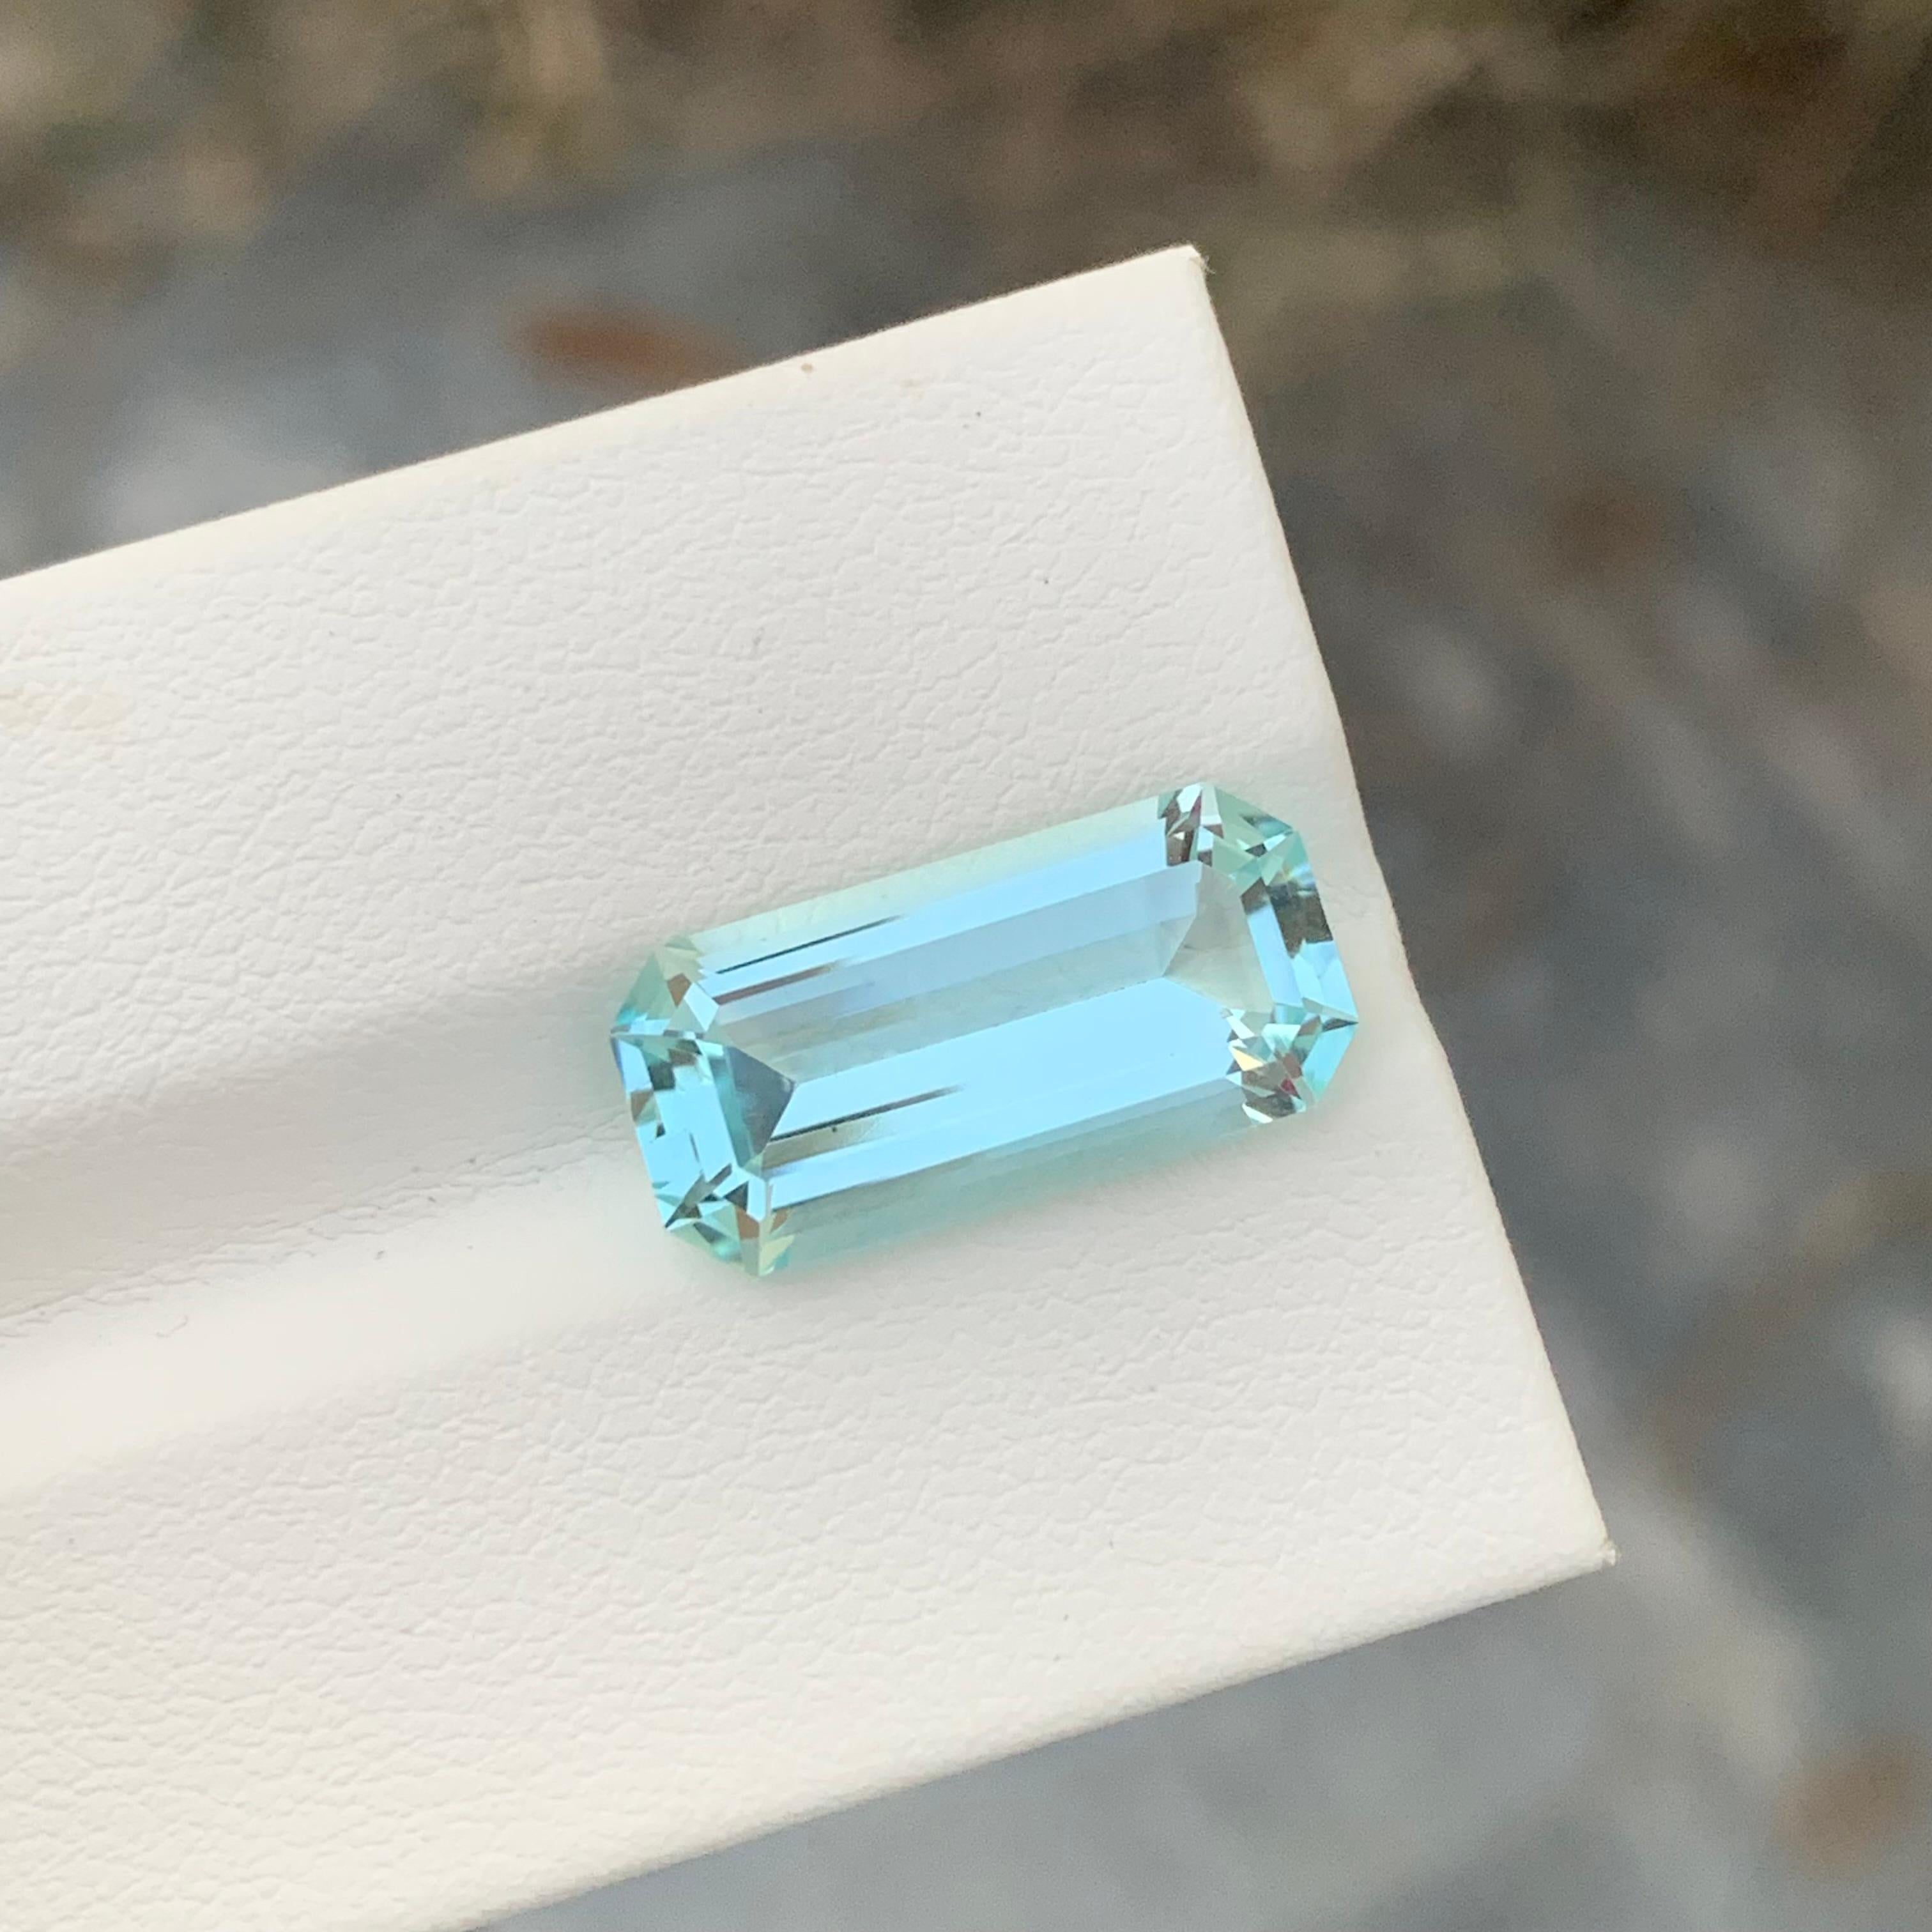 Loose Aquamarine
Weight: 6.35 Carat
Dimension: 17.4 x 8.3 x 5.8 Mm
Colour : Pale Blue
Origin: Shigar Valley, Pakistan
Treatment: Non
Certificate : On Demand
Shape: Emerald 

Aquamarine is a captivating gemstone known for its enchanting blue-green